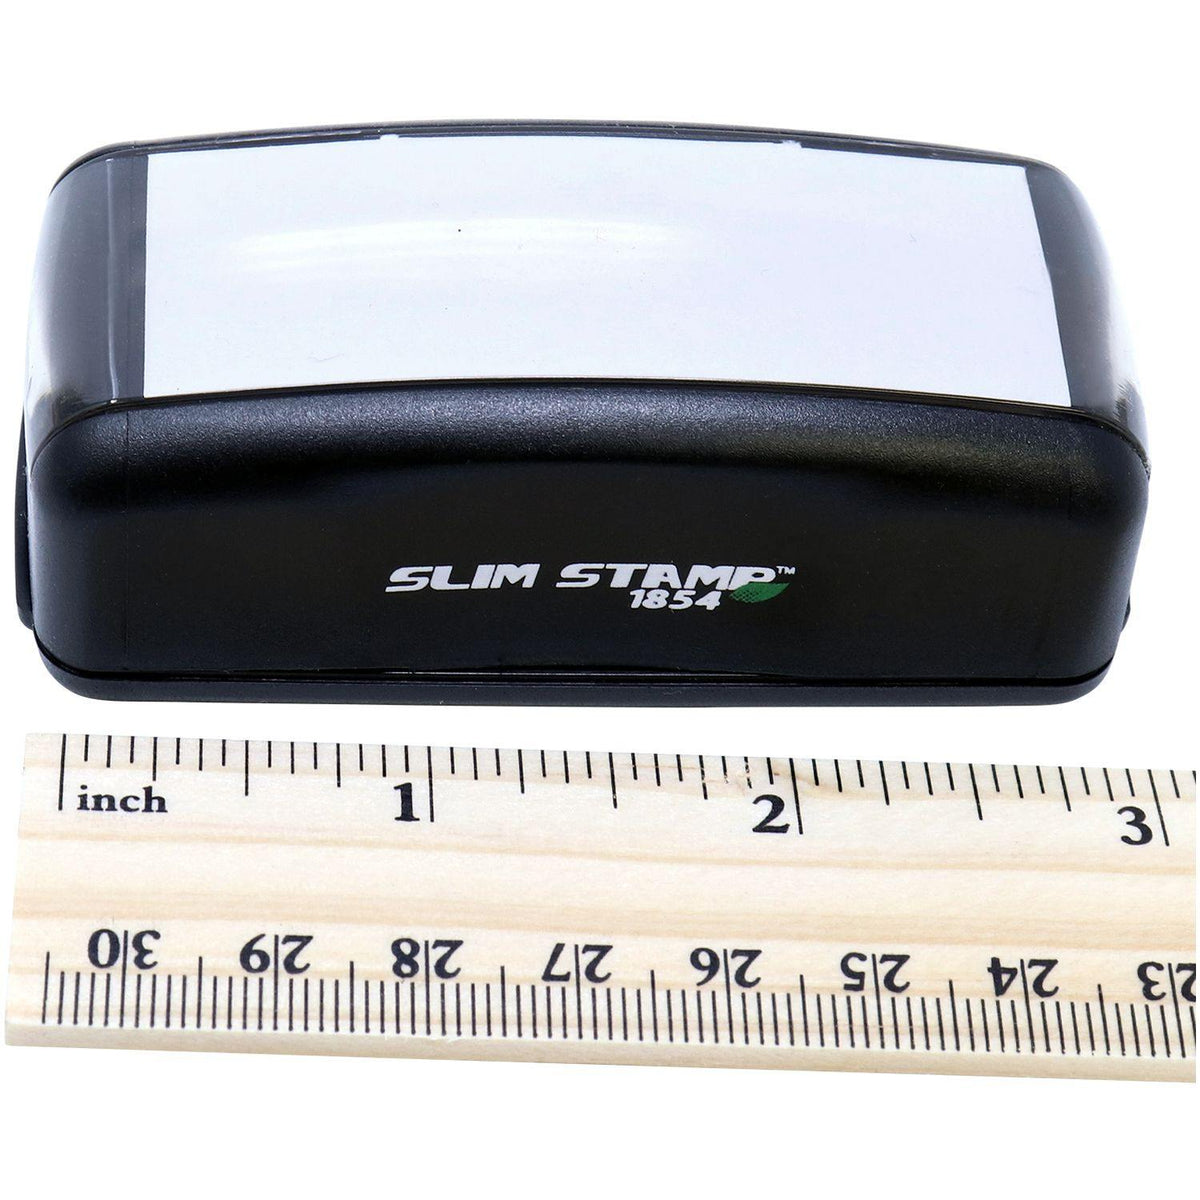 Measurement Large Pre Inked Chrono Stamp with Ruler